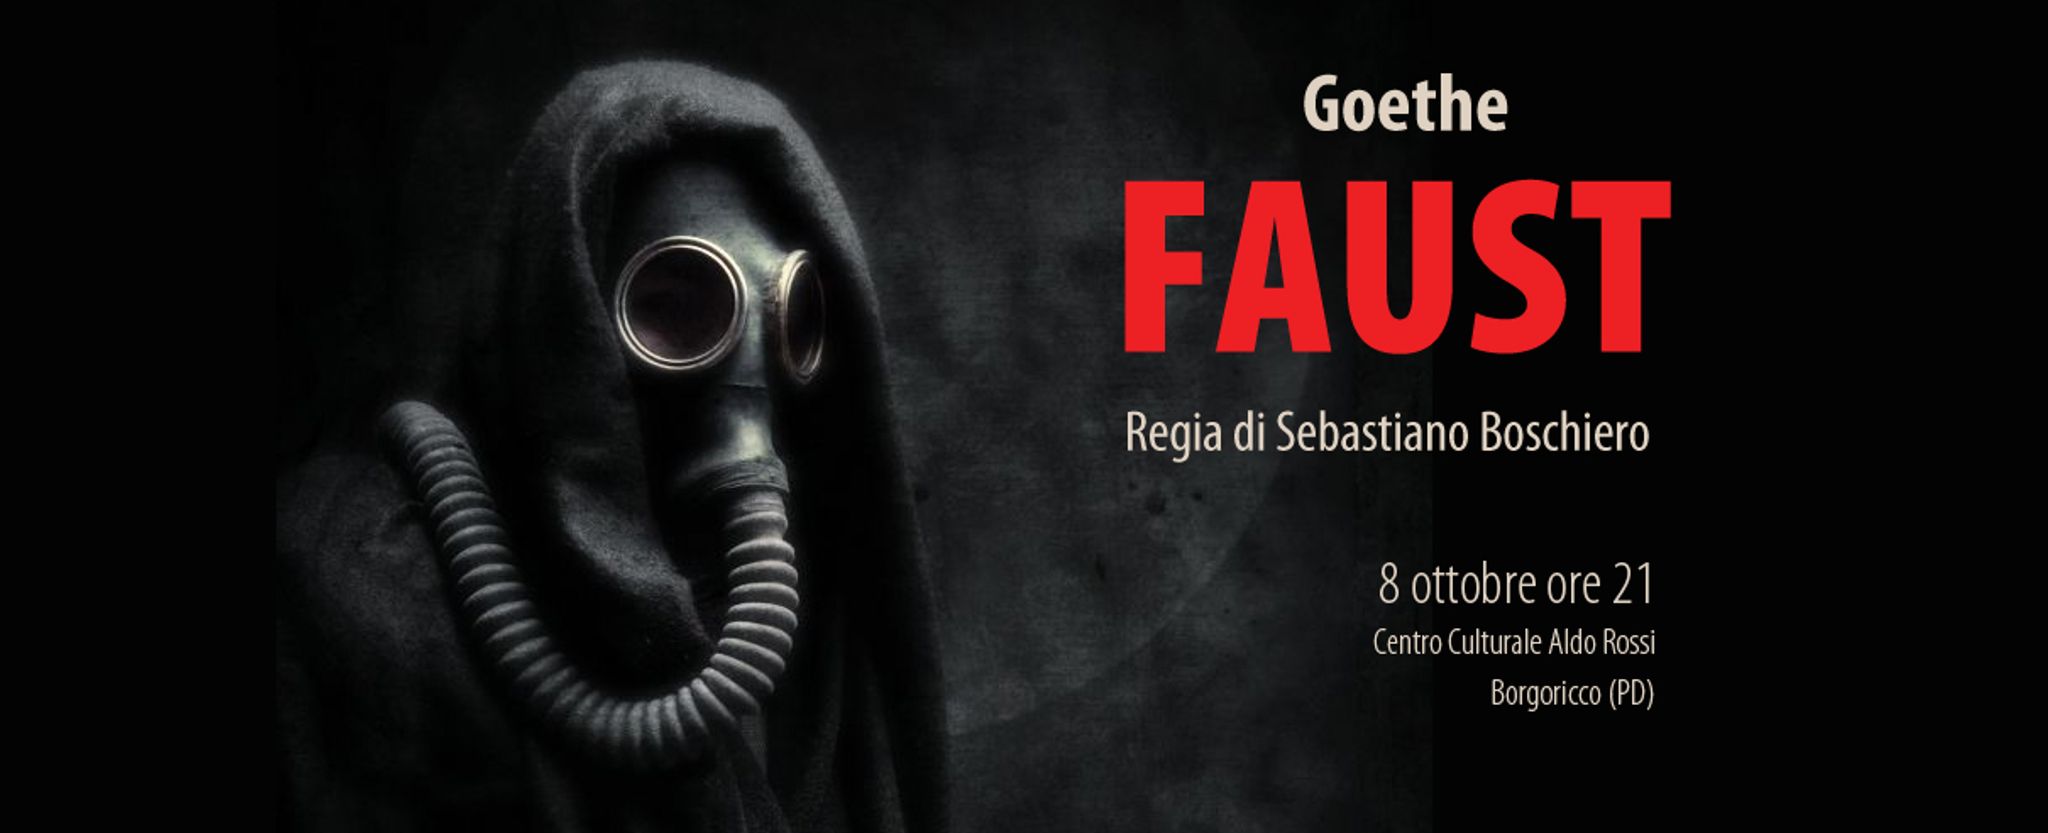 LiveAct:  “Faust”